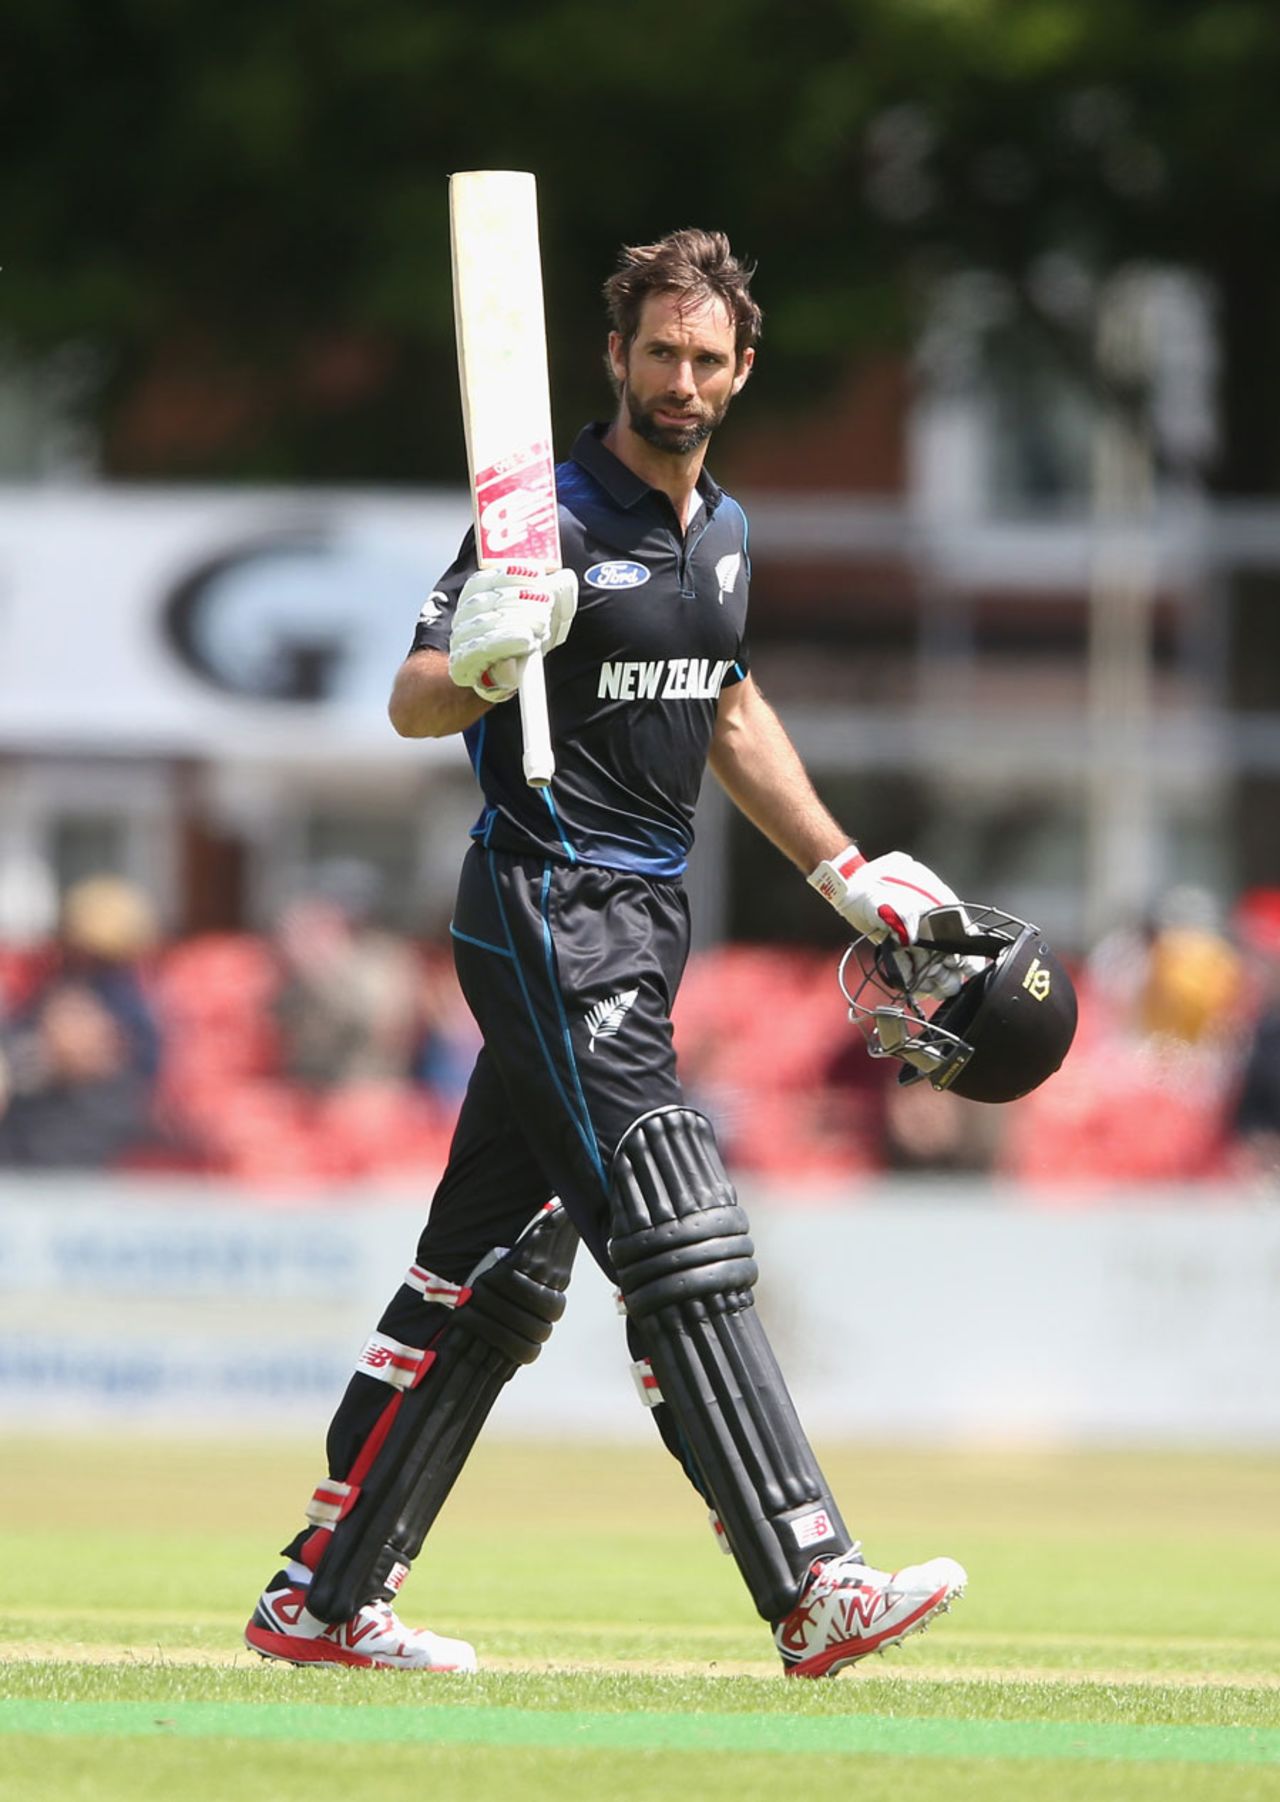 Grant Elliott reached his century in the final over, Leicestershire v New Zealanders, Tour match, Grace Road, June 6, 2015